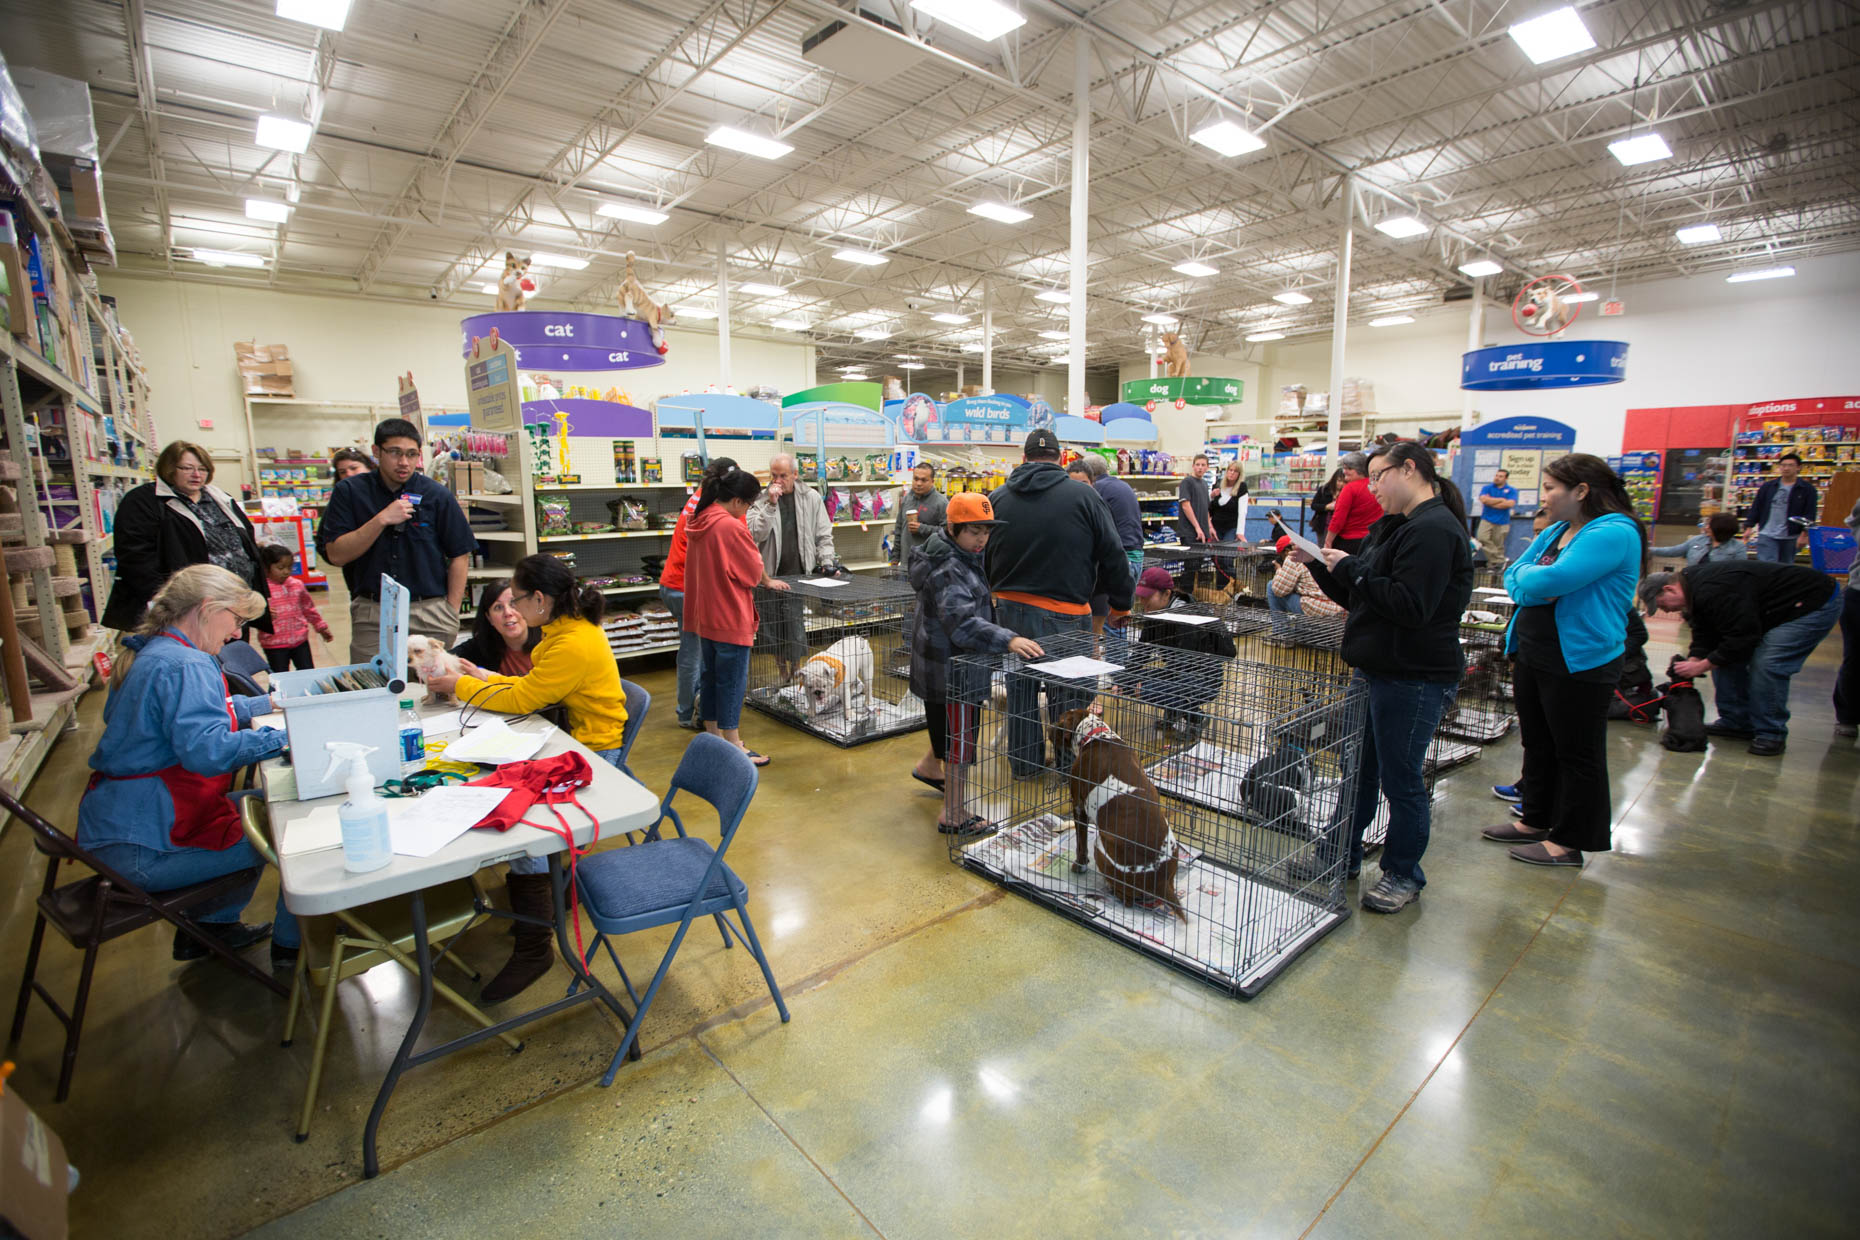 Adoption Event at PetSmart by Mark Rogers